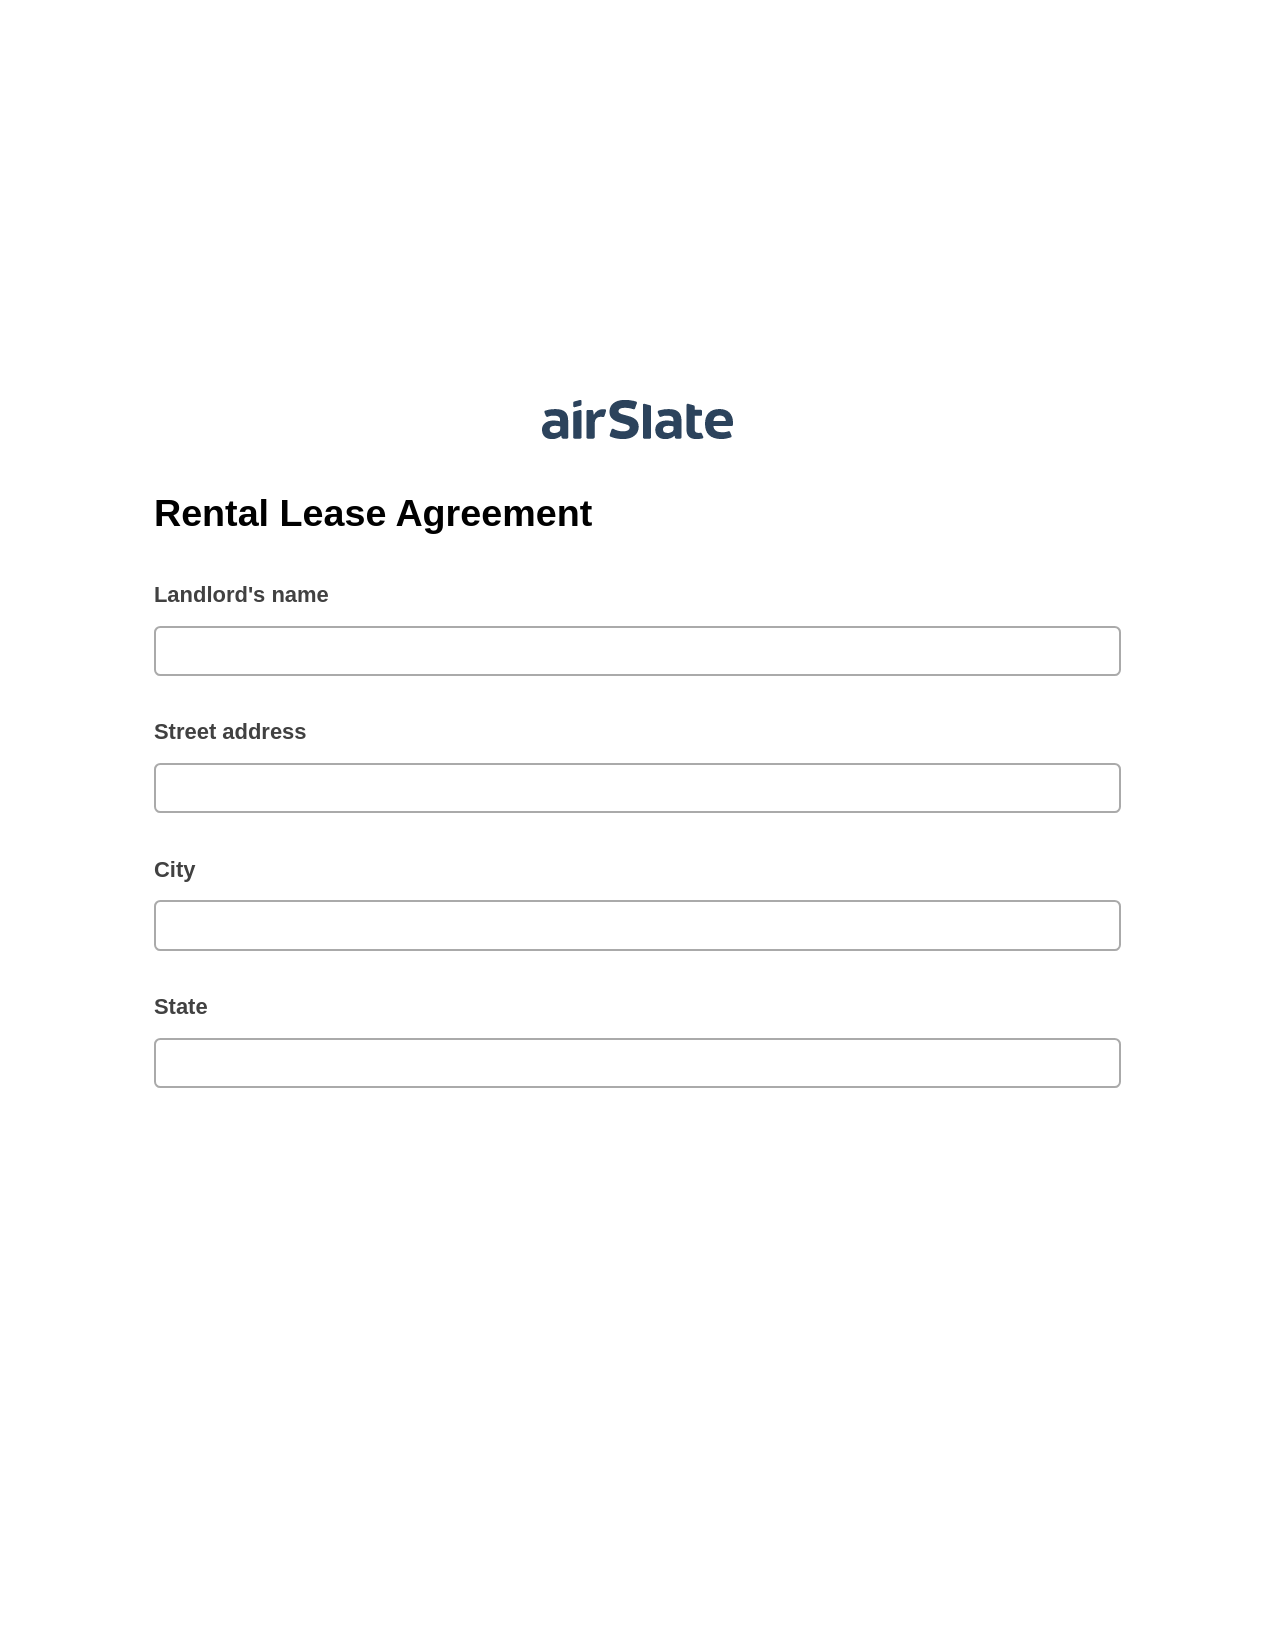 Rental Lease Agreement Pre-fill from Salesforce Records with SOQL Bot, Invoke Salesforce Process Bot, Webhook Postfinish Bot